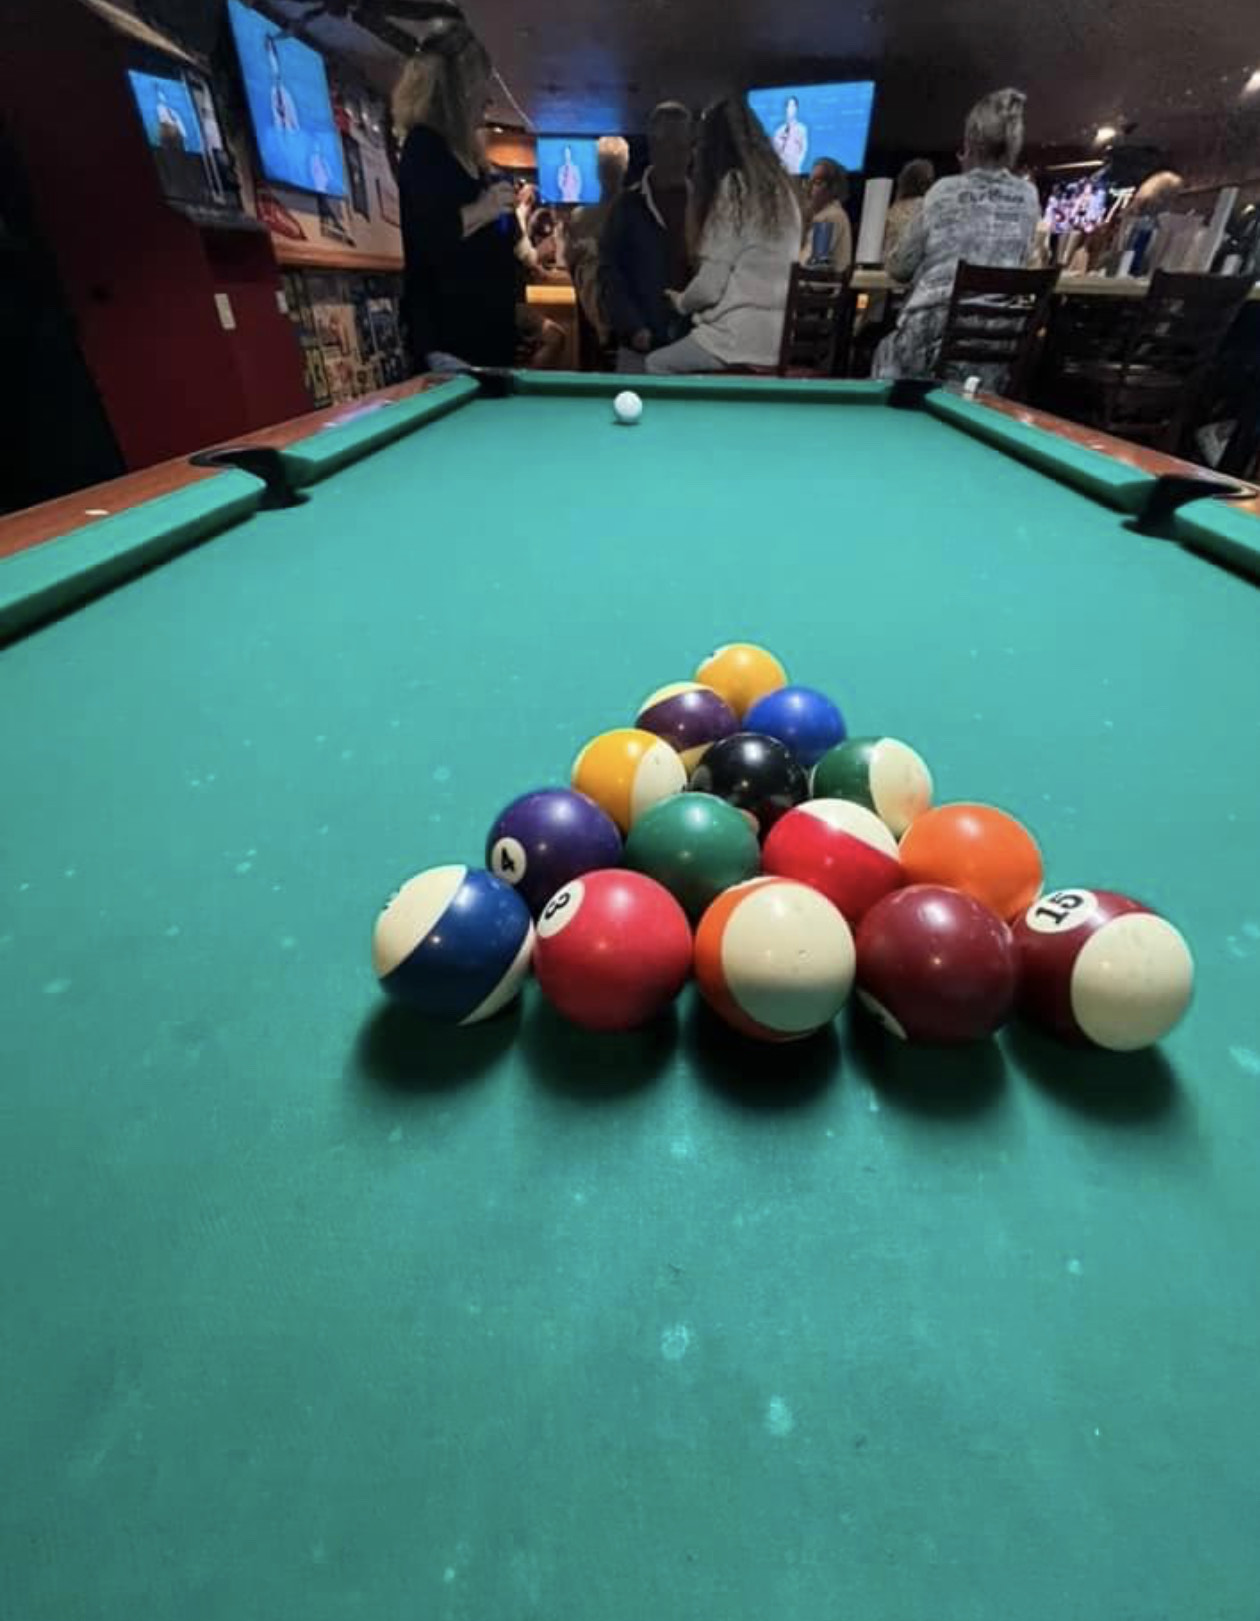 play pool at busters-pool table